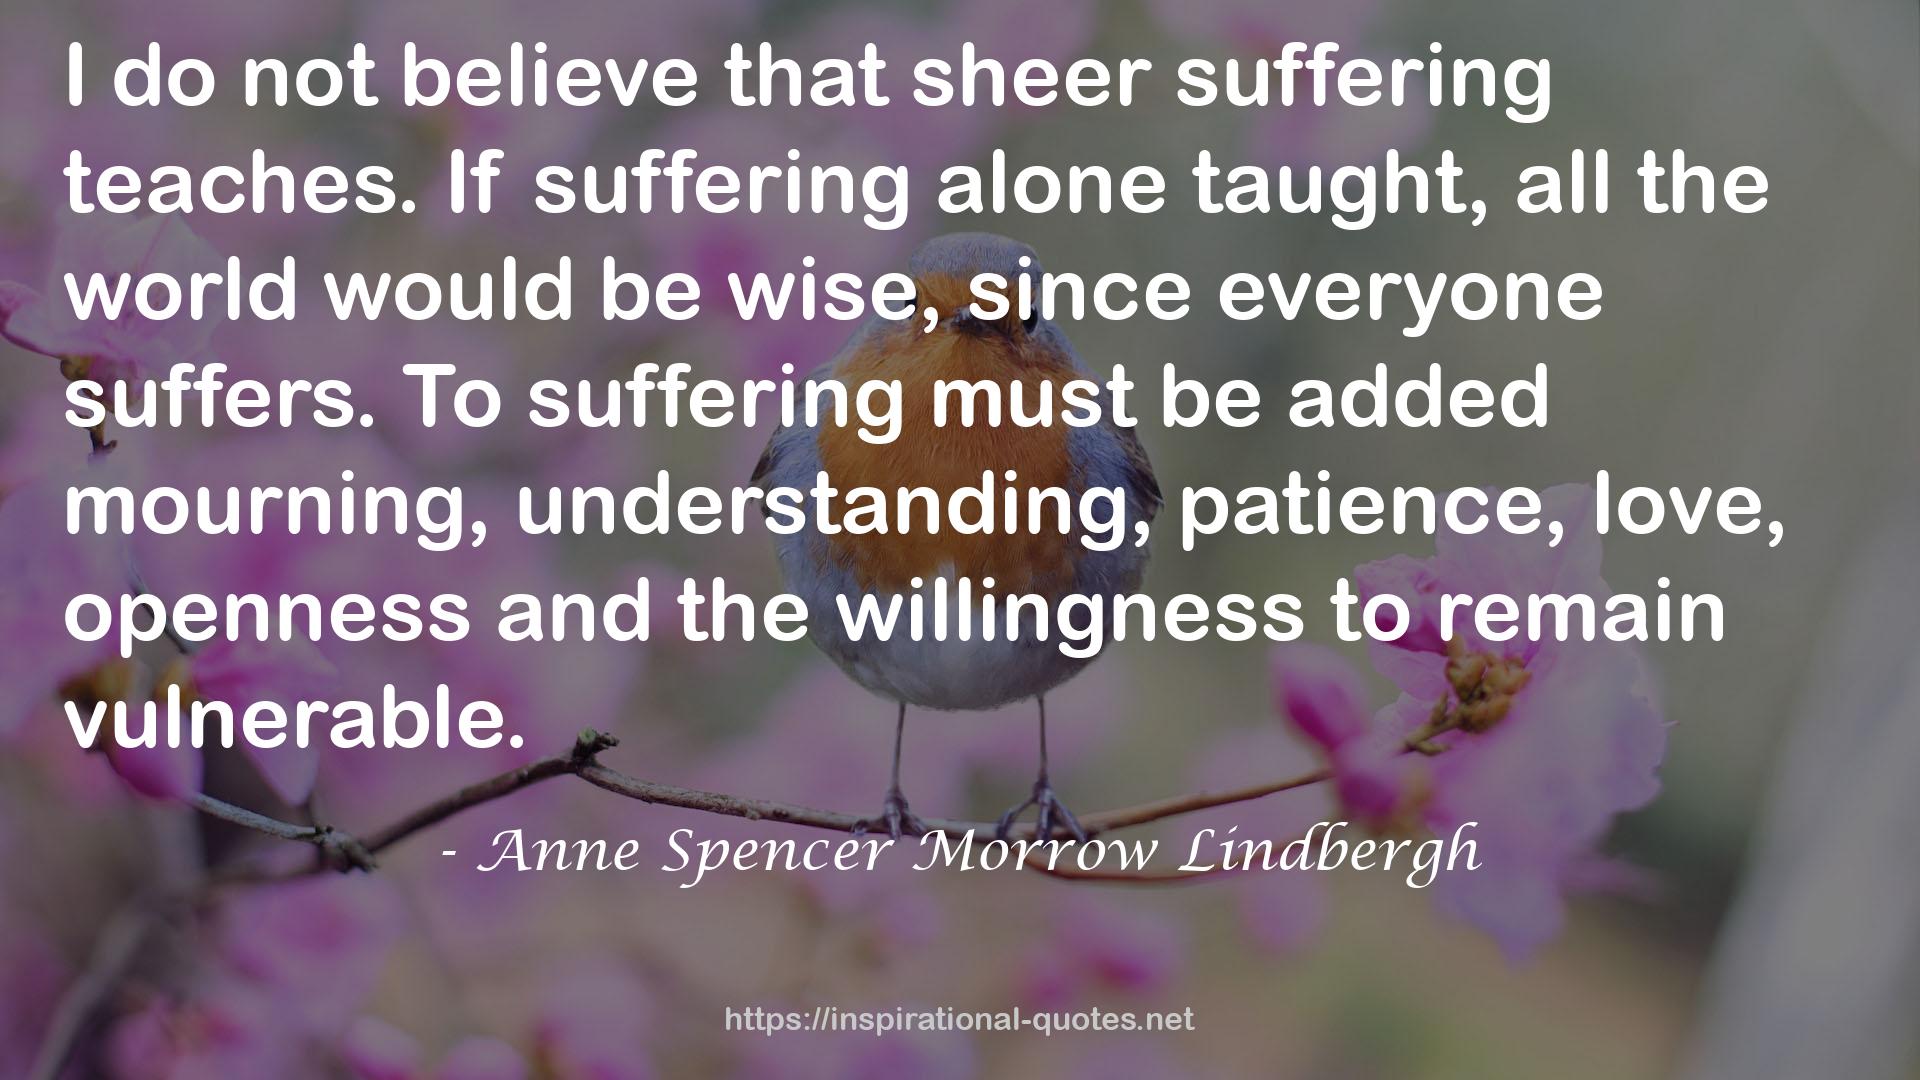 Anne Spencer Morrow Lindbergh QUOTES